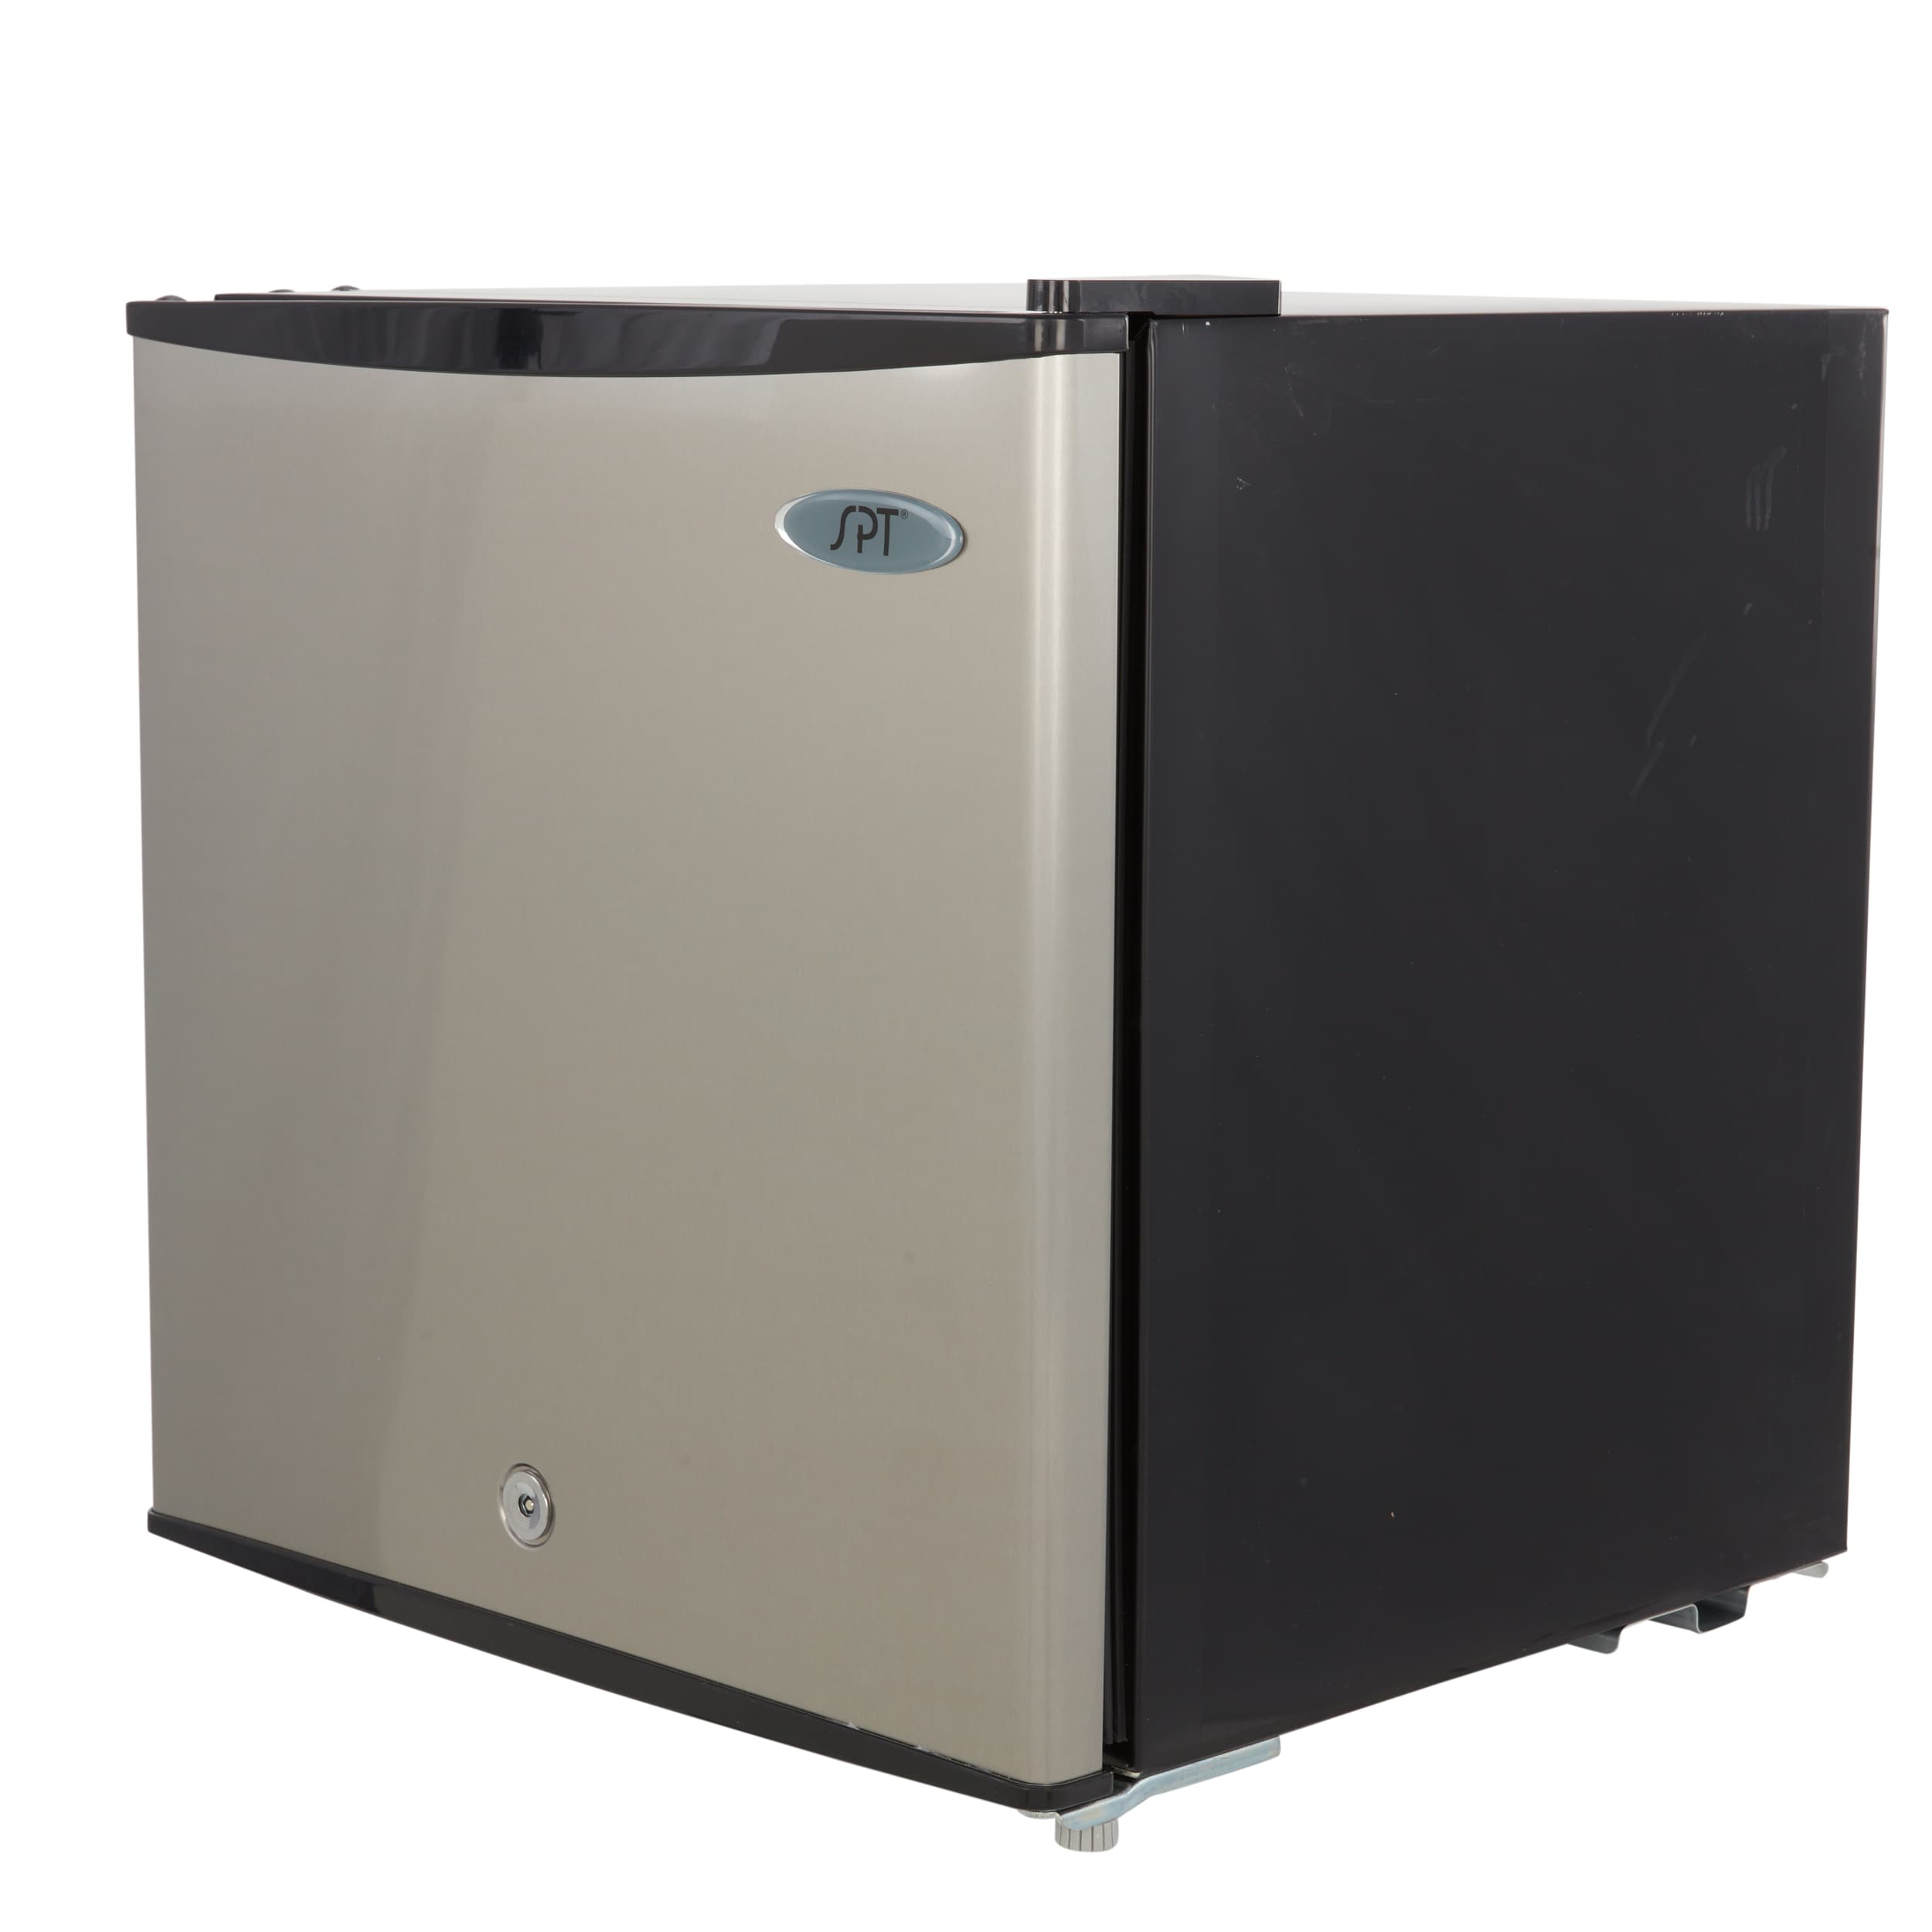 SPT IM-60YUSA: 50LBS Stainless Steel Under-Counter Ice Maker